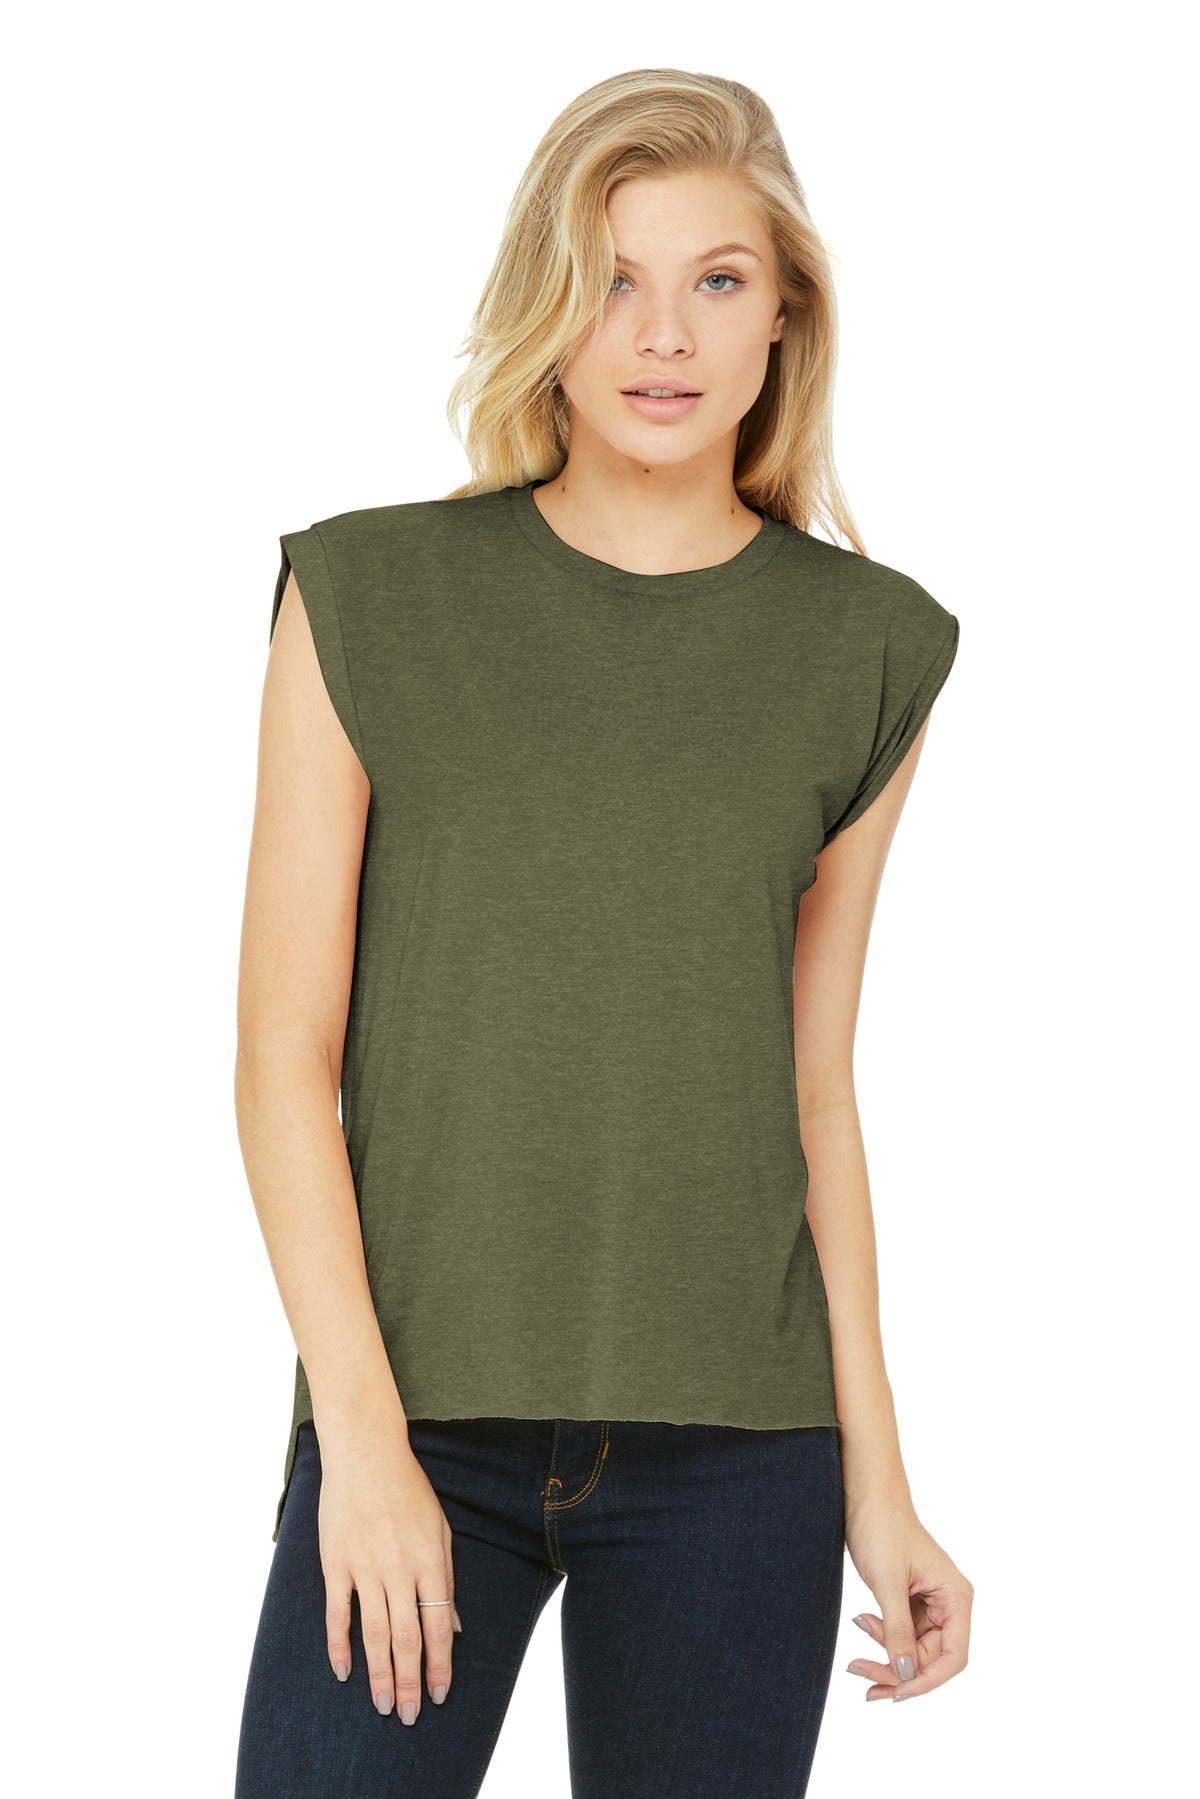 BELLA+CANVAS ® Women's Flowy Muscle Tee With Rolled Cuffs. BC8804